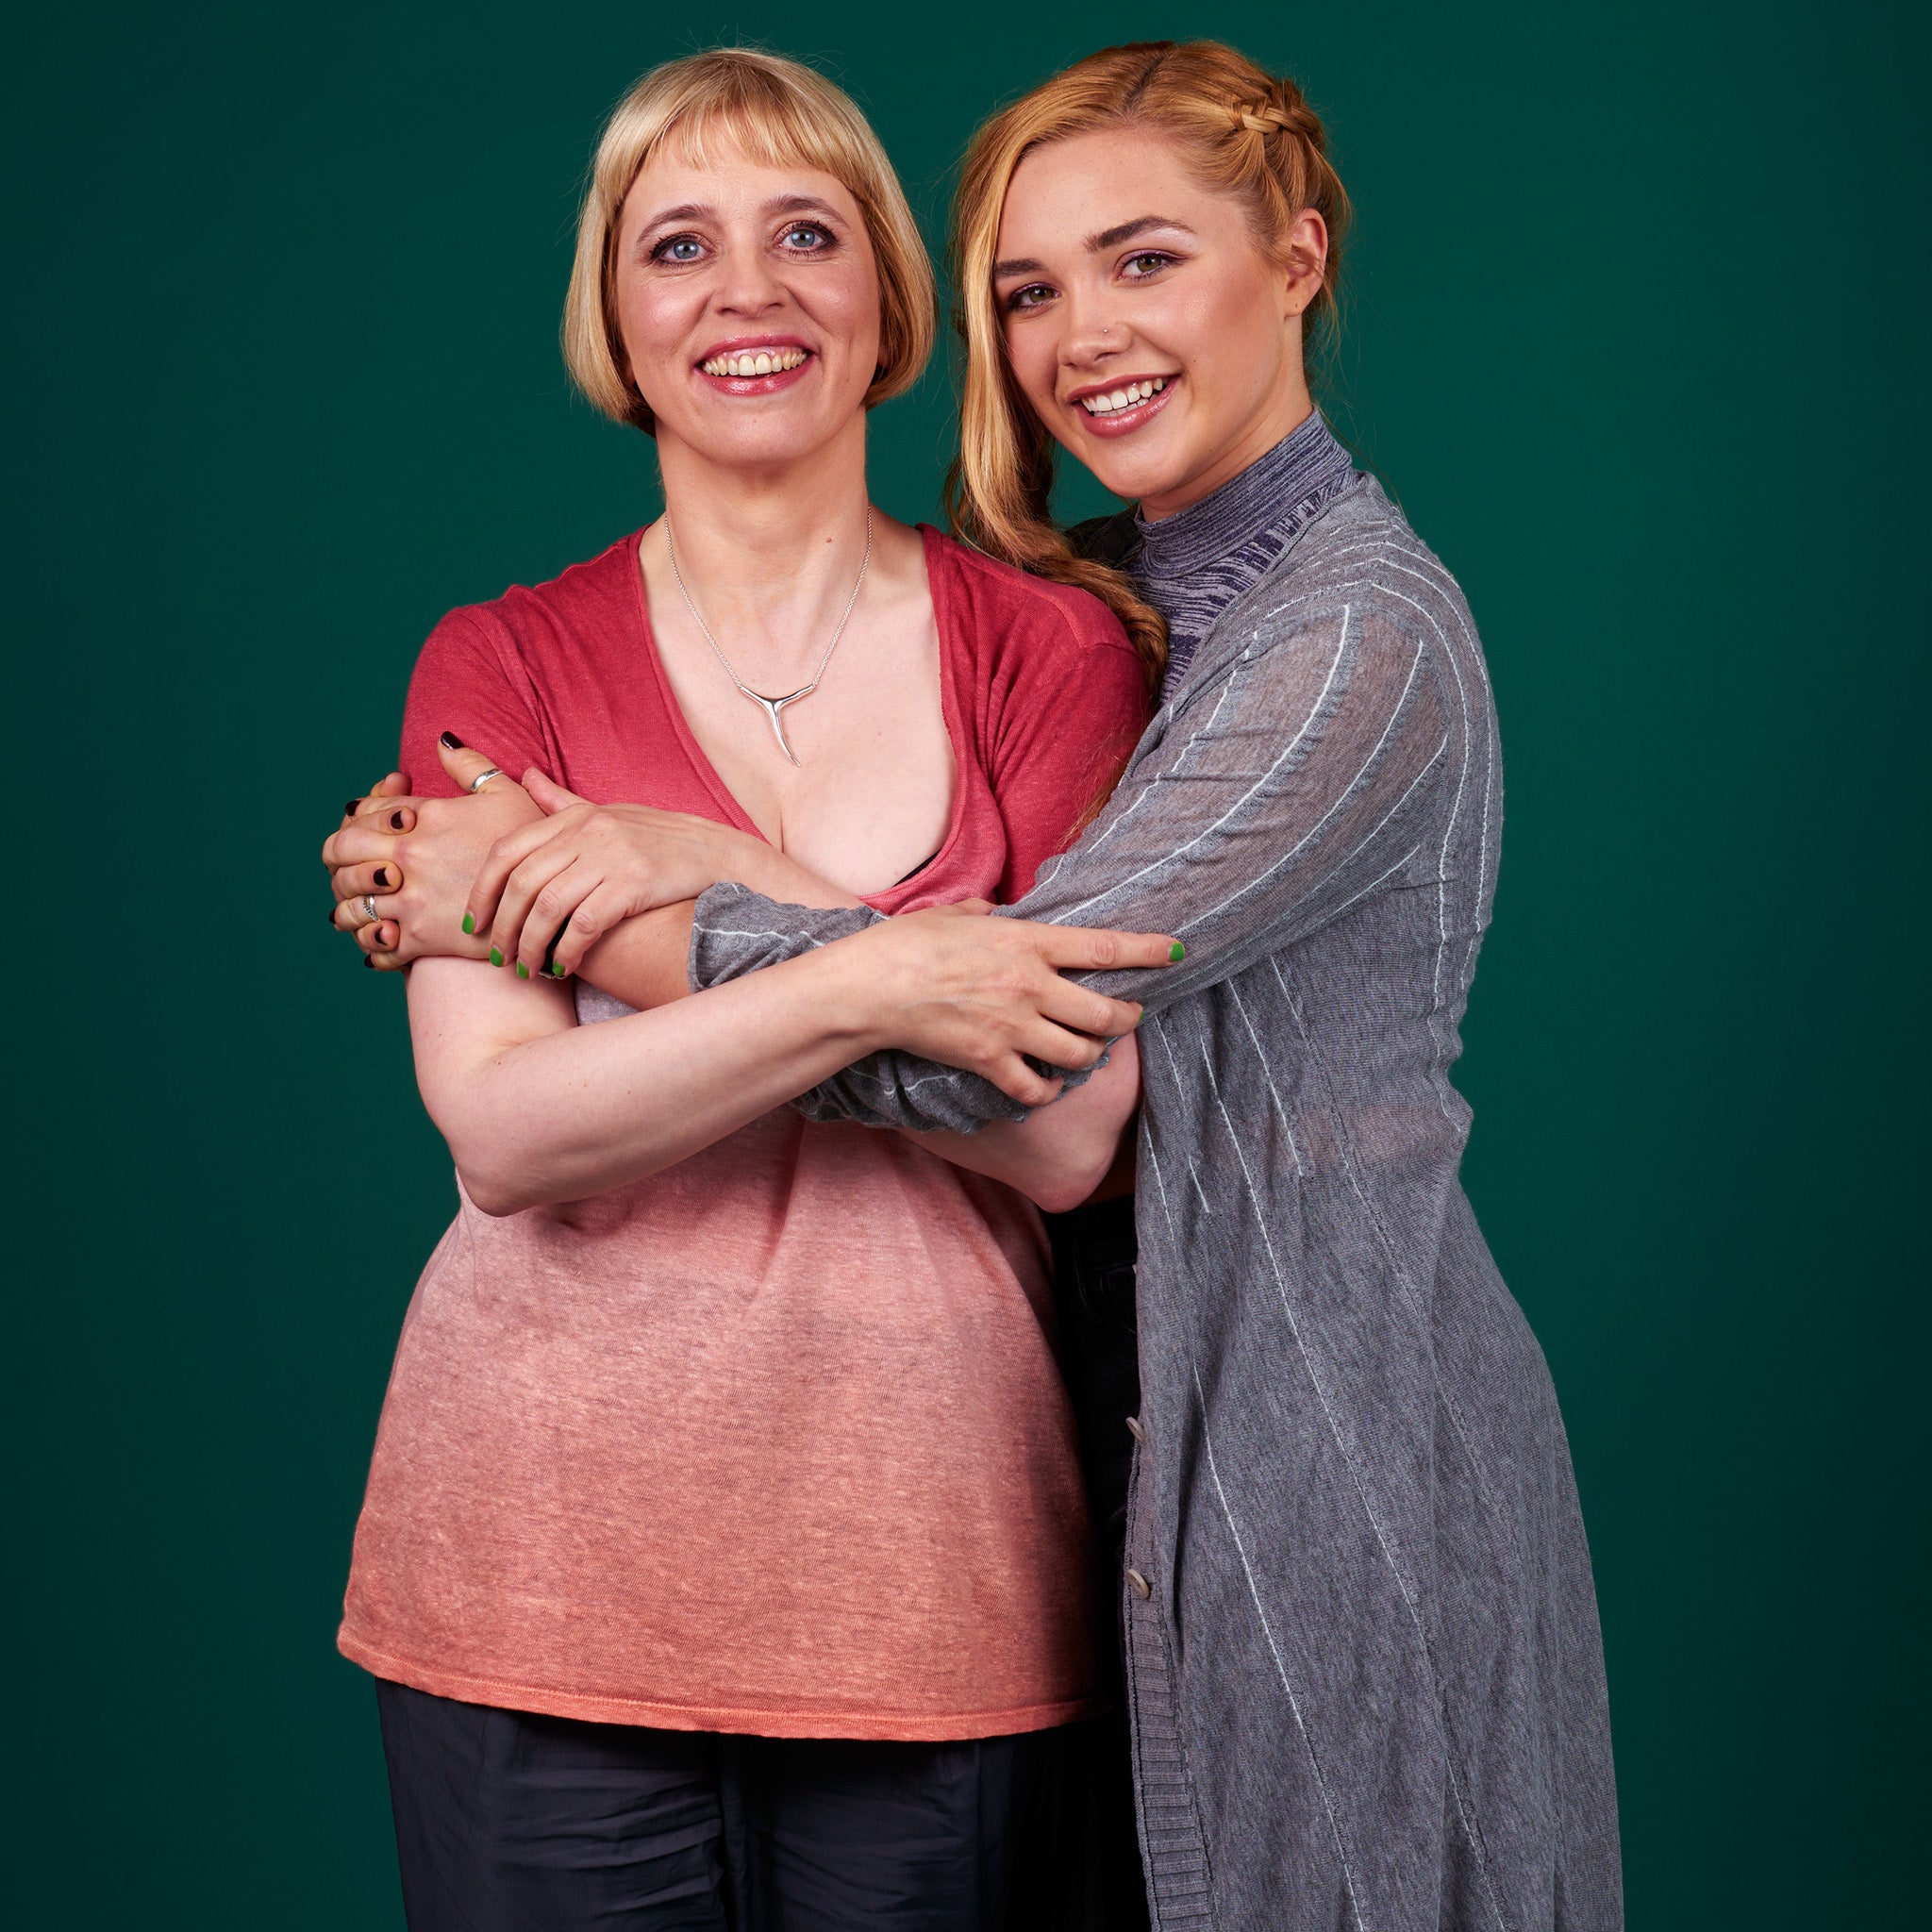 Carol Morley, director of The Falling with Florence Pugh